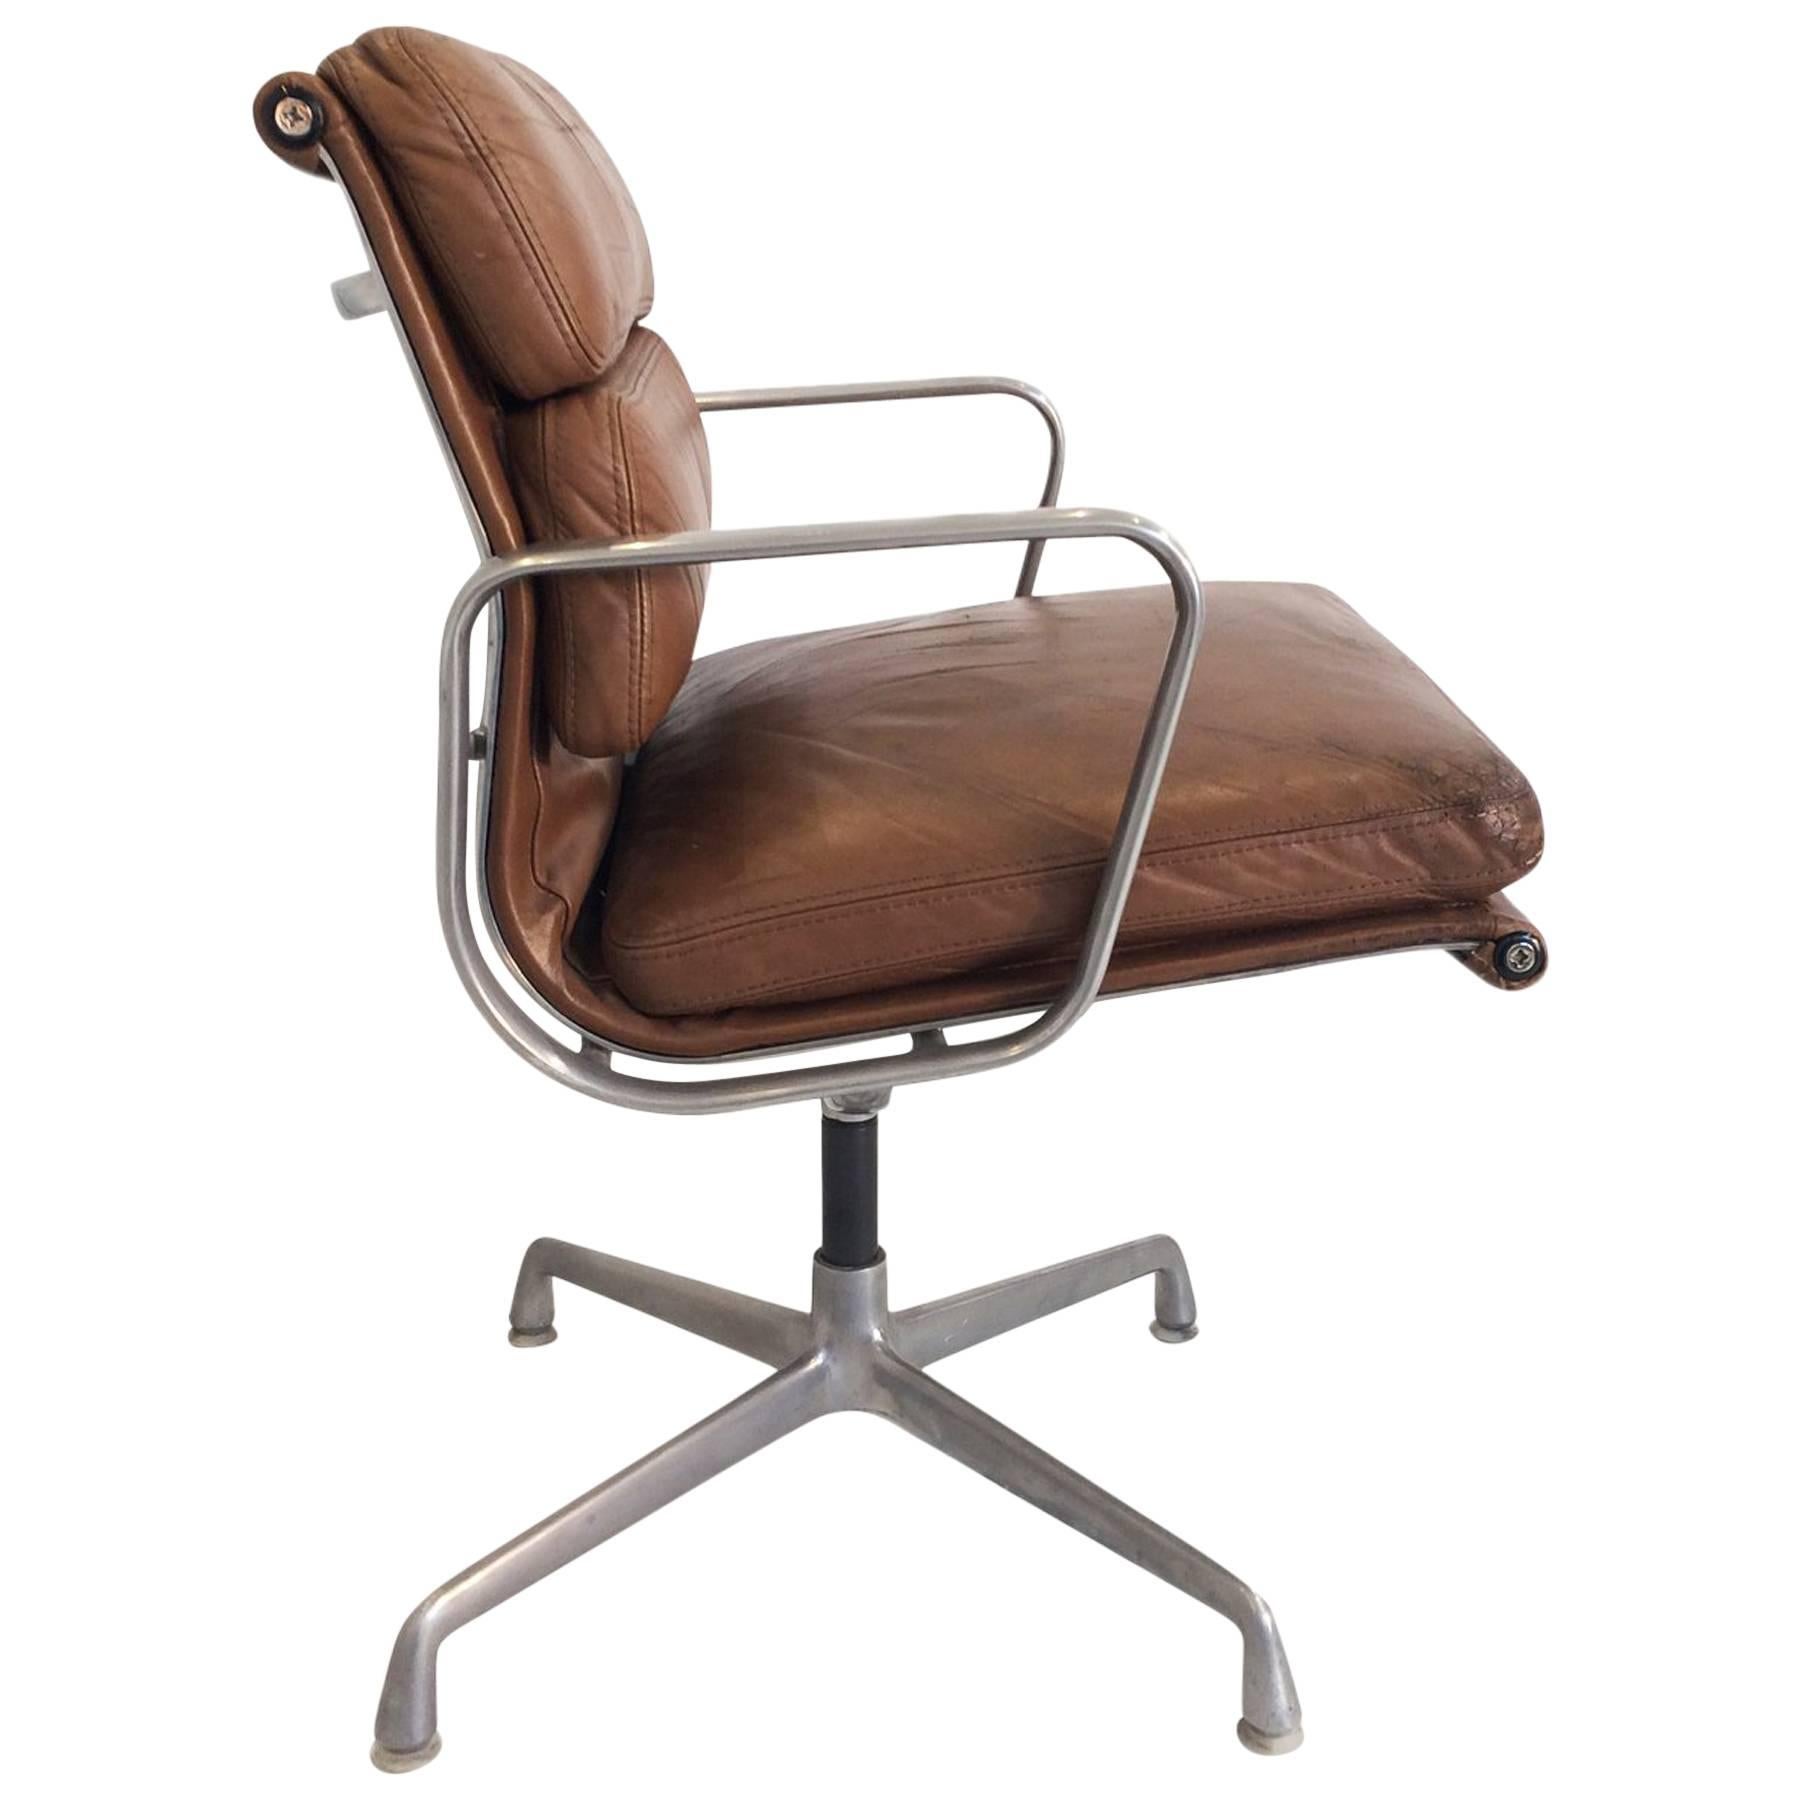 Beautifully Worn and Distressed Herman Miller 1 Eames Soft Pad Chair